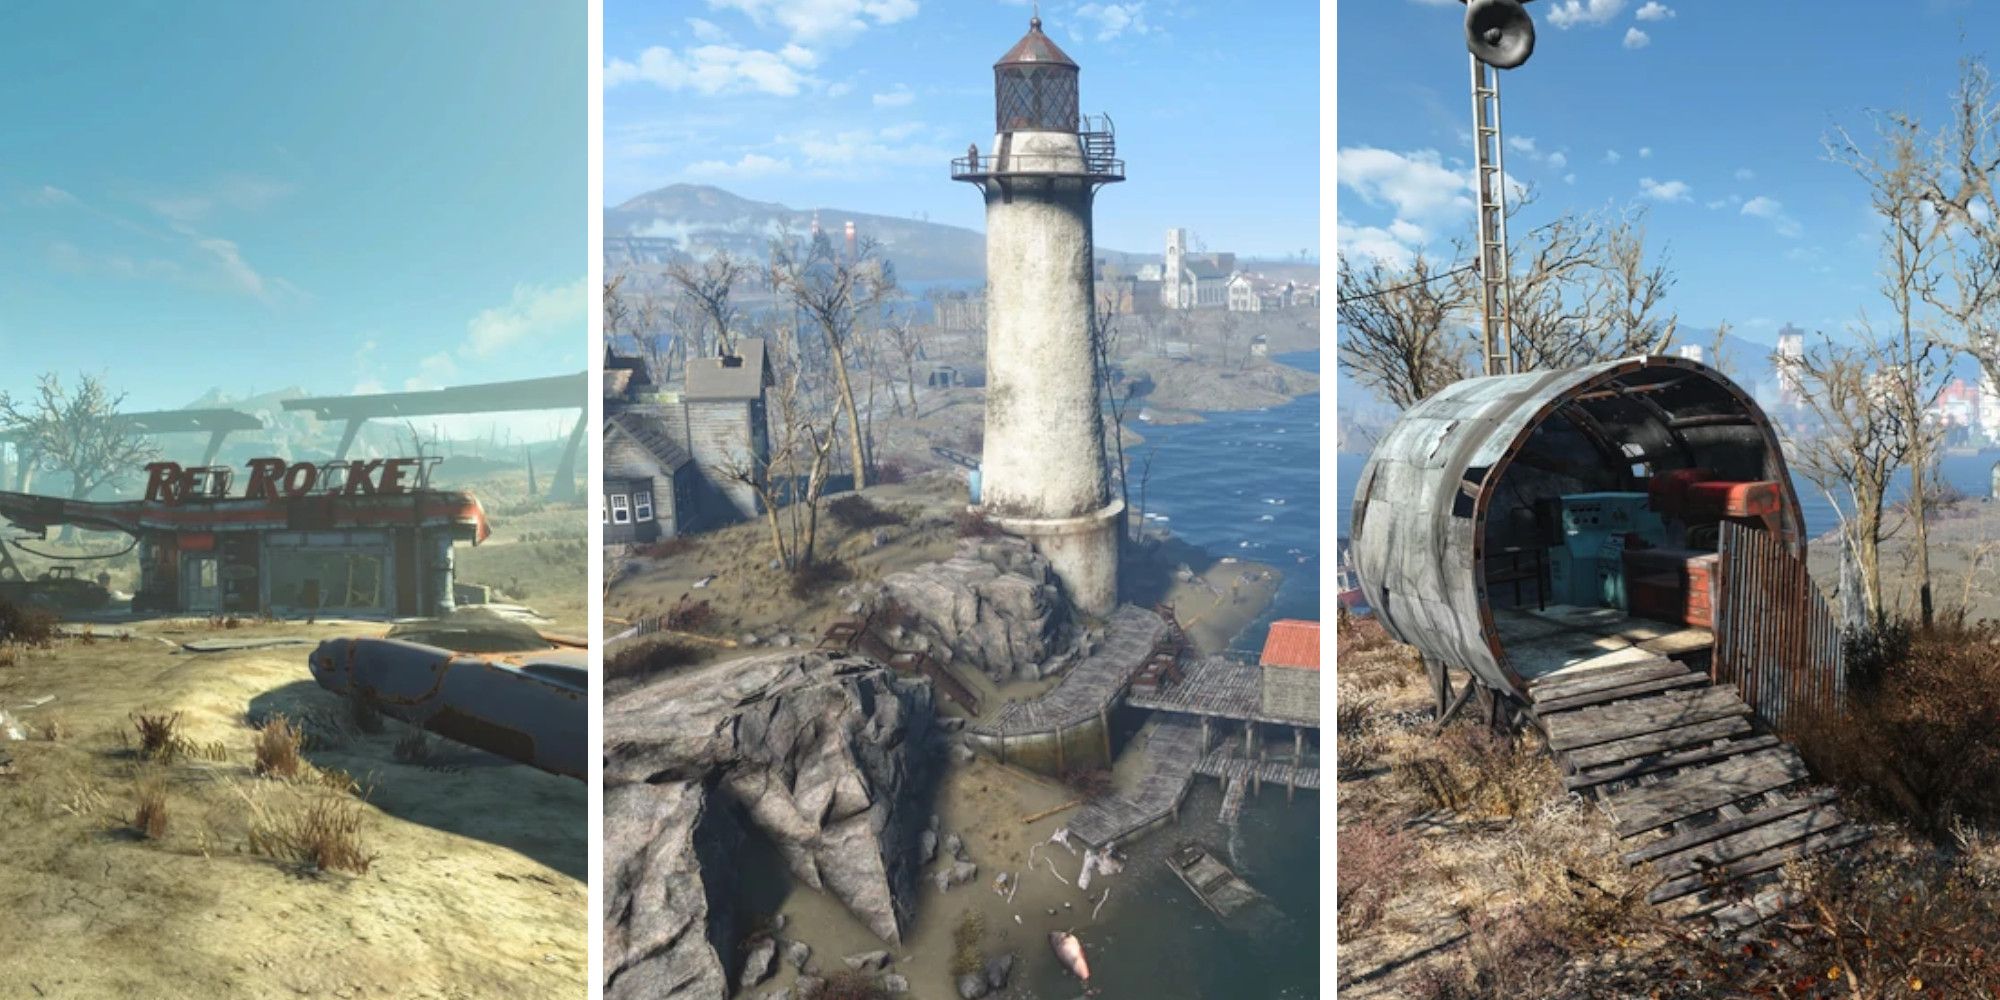 Conquest build new settlements and camping fallout 4 на русском фото 1